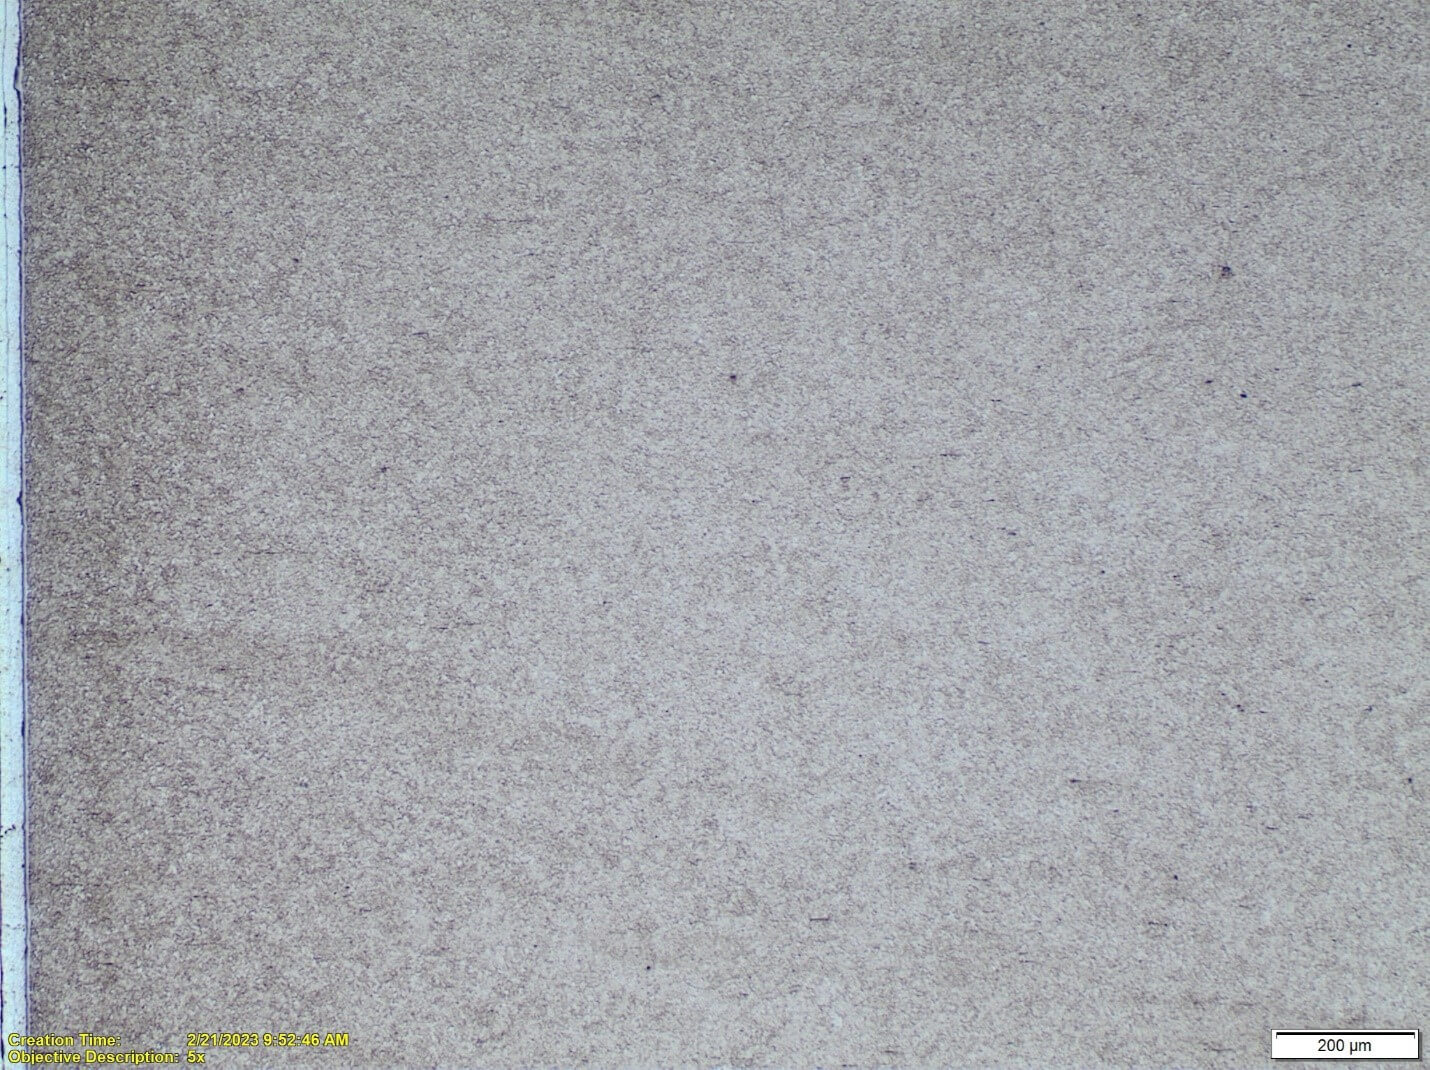 Nitrided layer produced in 4340 steel after the ion/plasma nitriding process at two different magnif